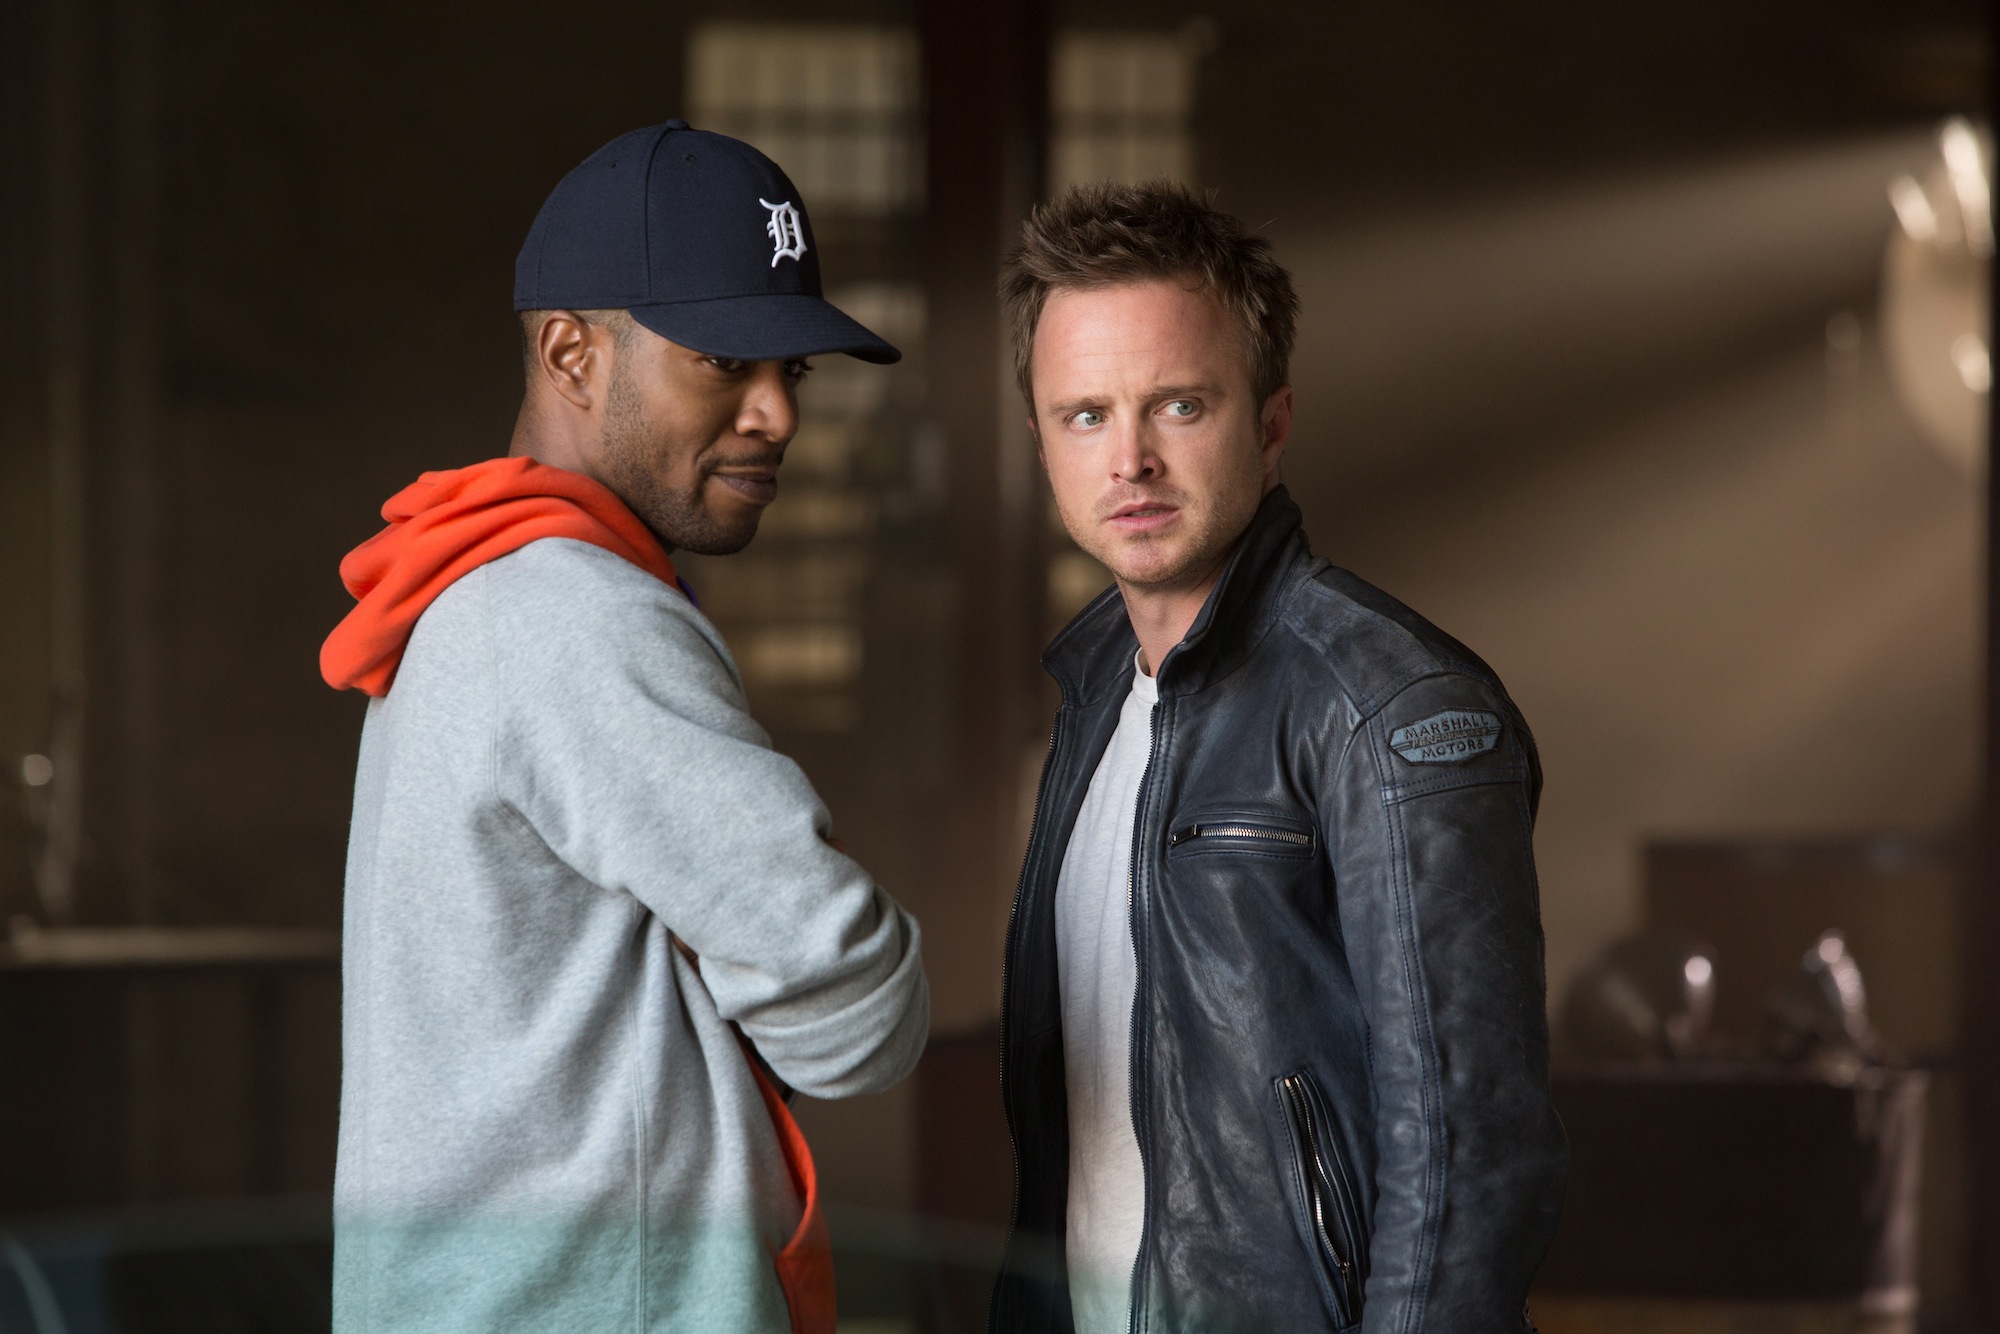 ‘Need For Speed’ – Check Out The Brand New Pics!